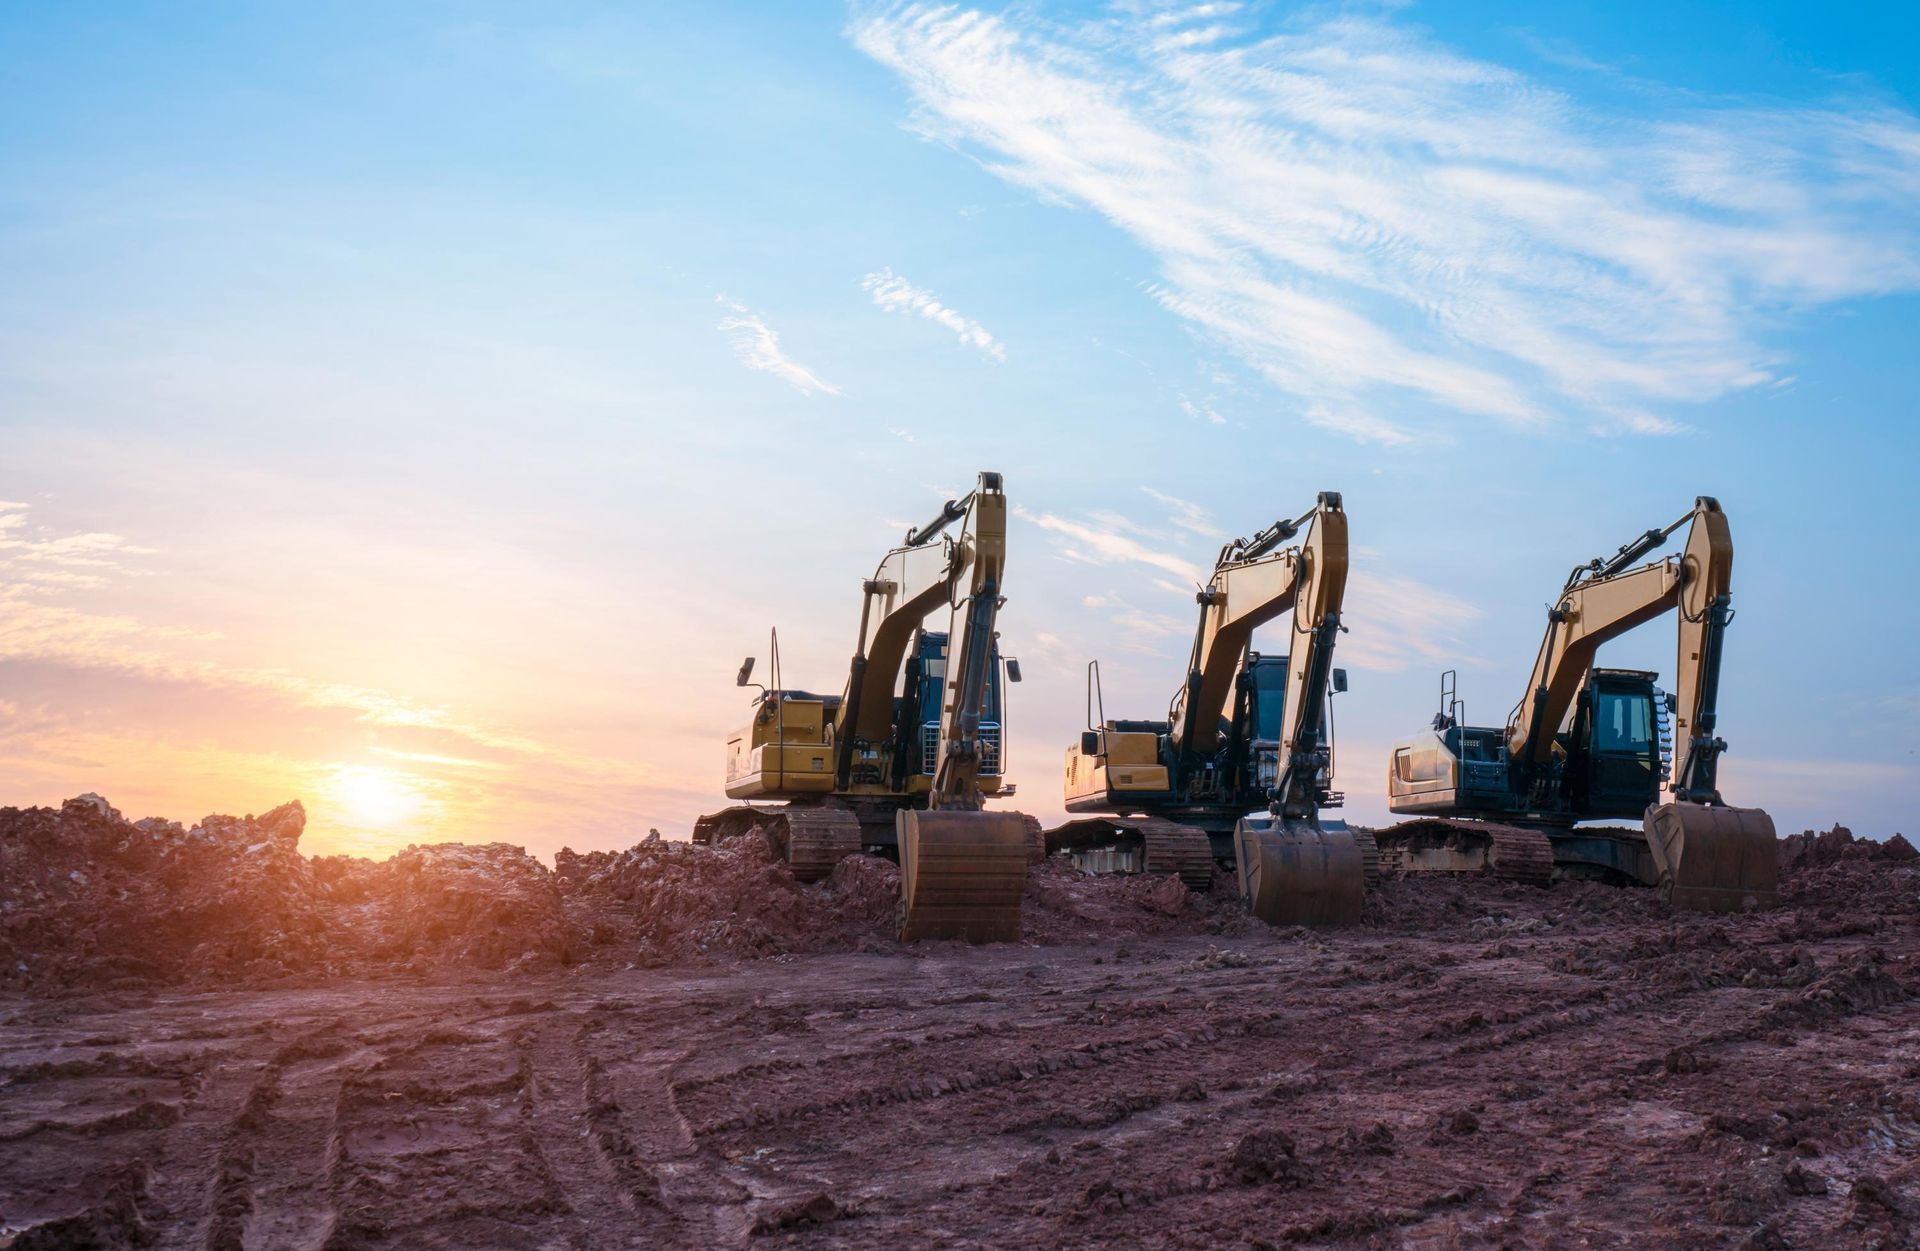 A row of construction vehicles are parked in a dirt field at sunset.